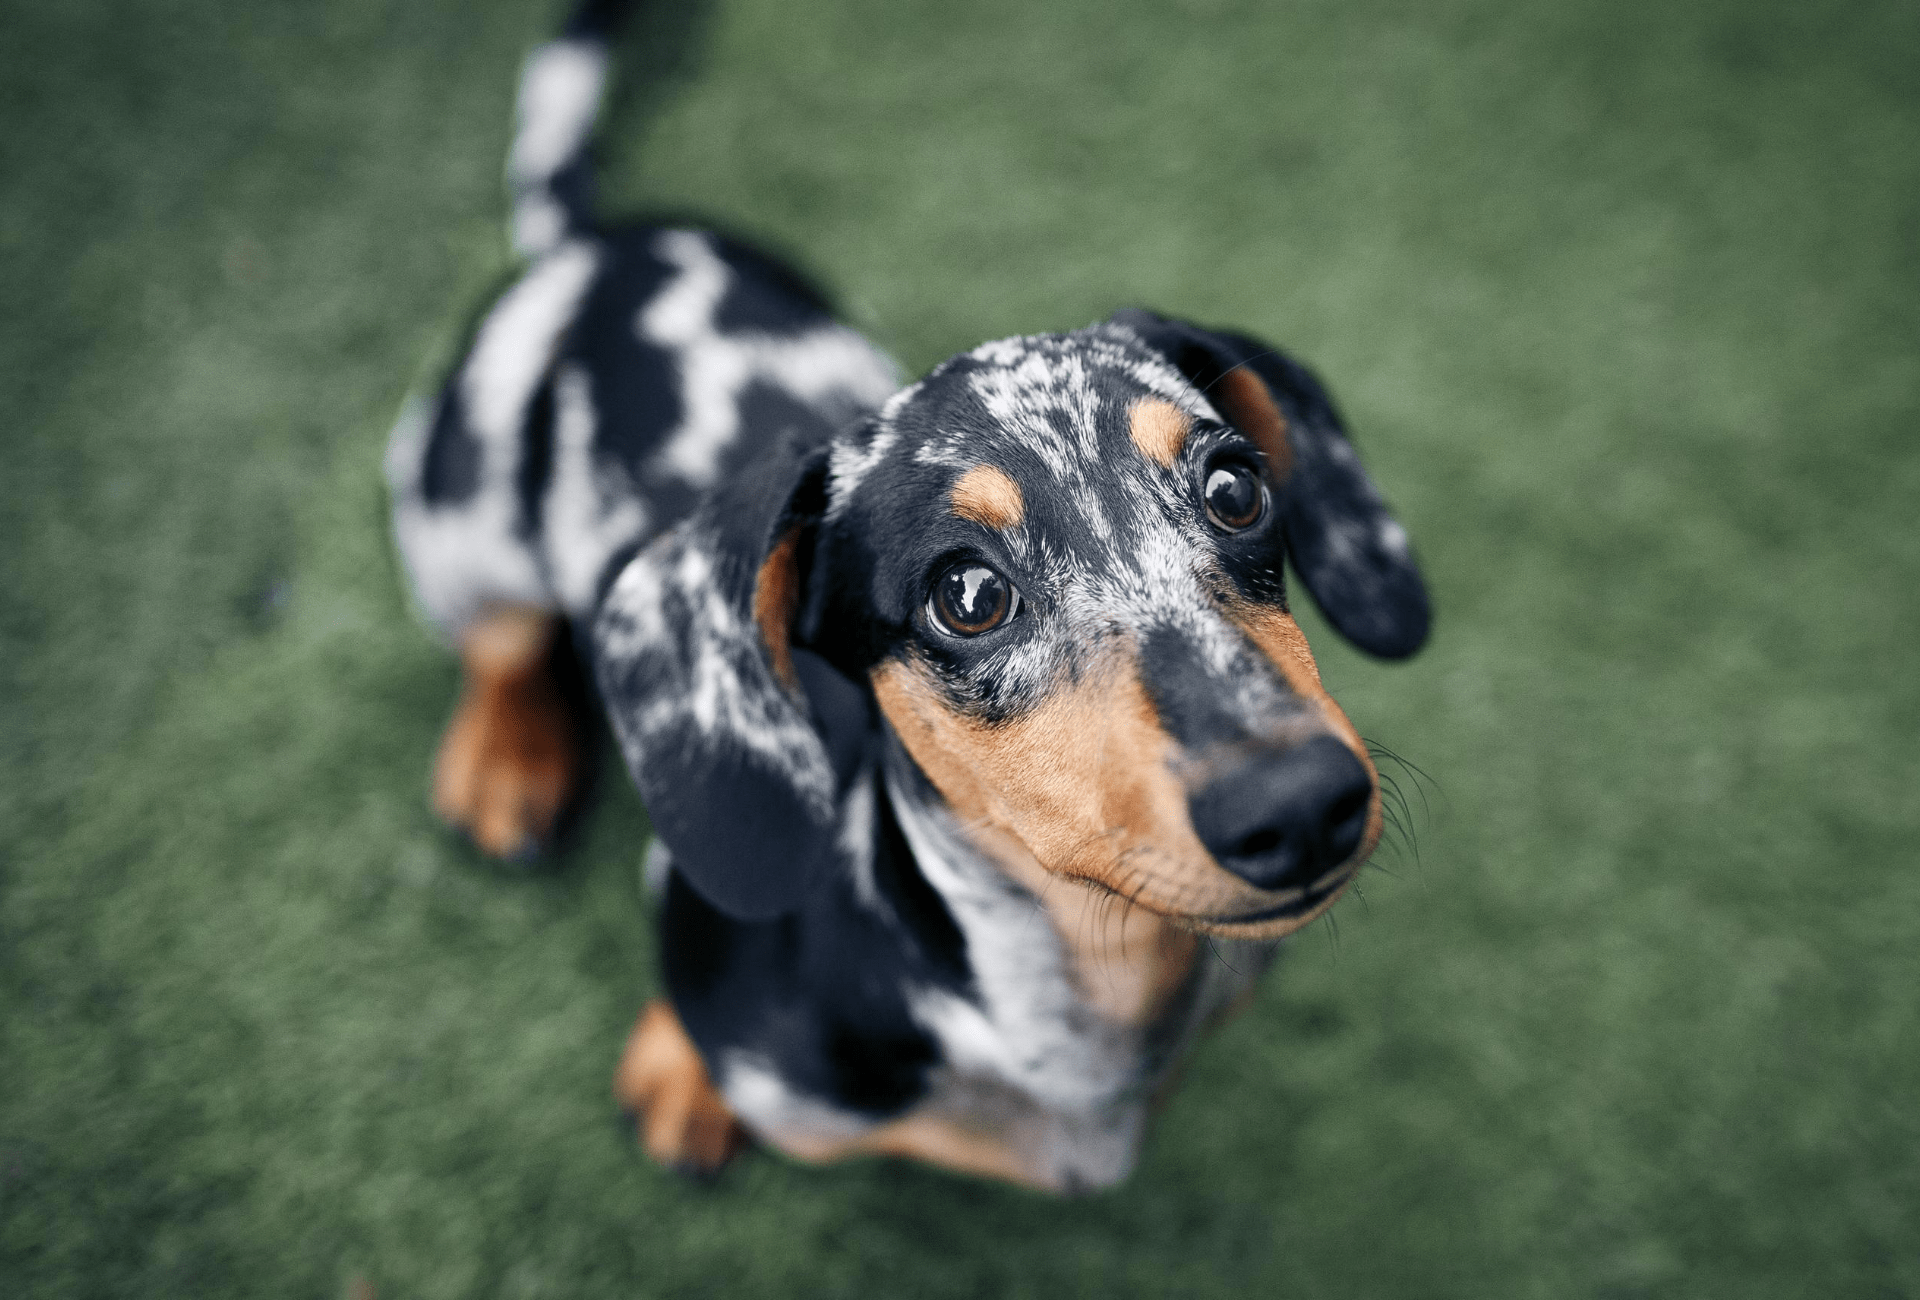 What is the life expectancy of a Dachshund?